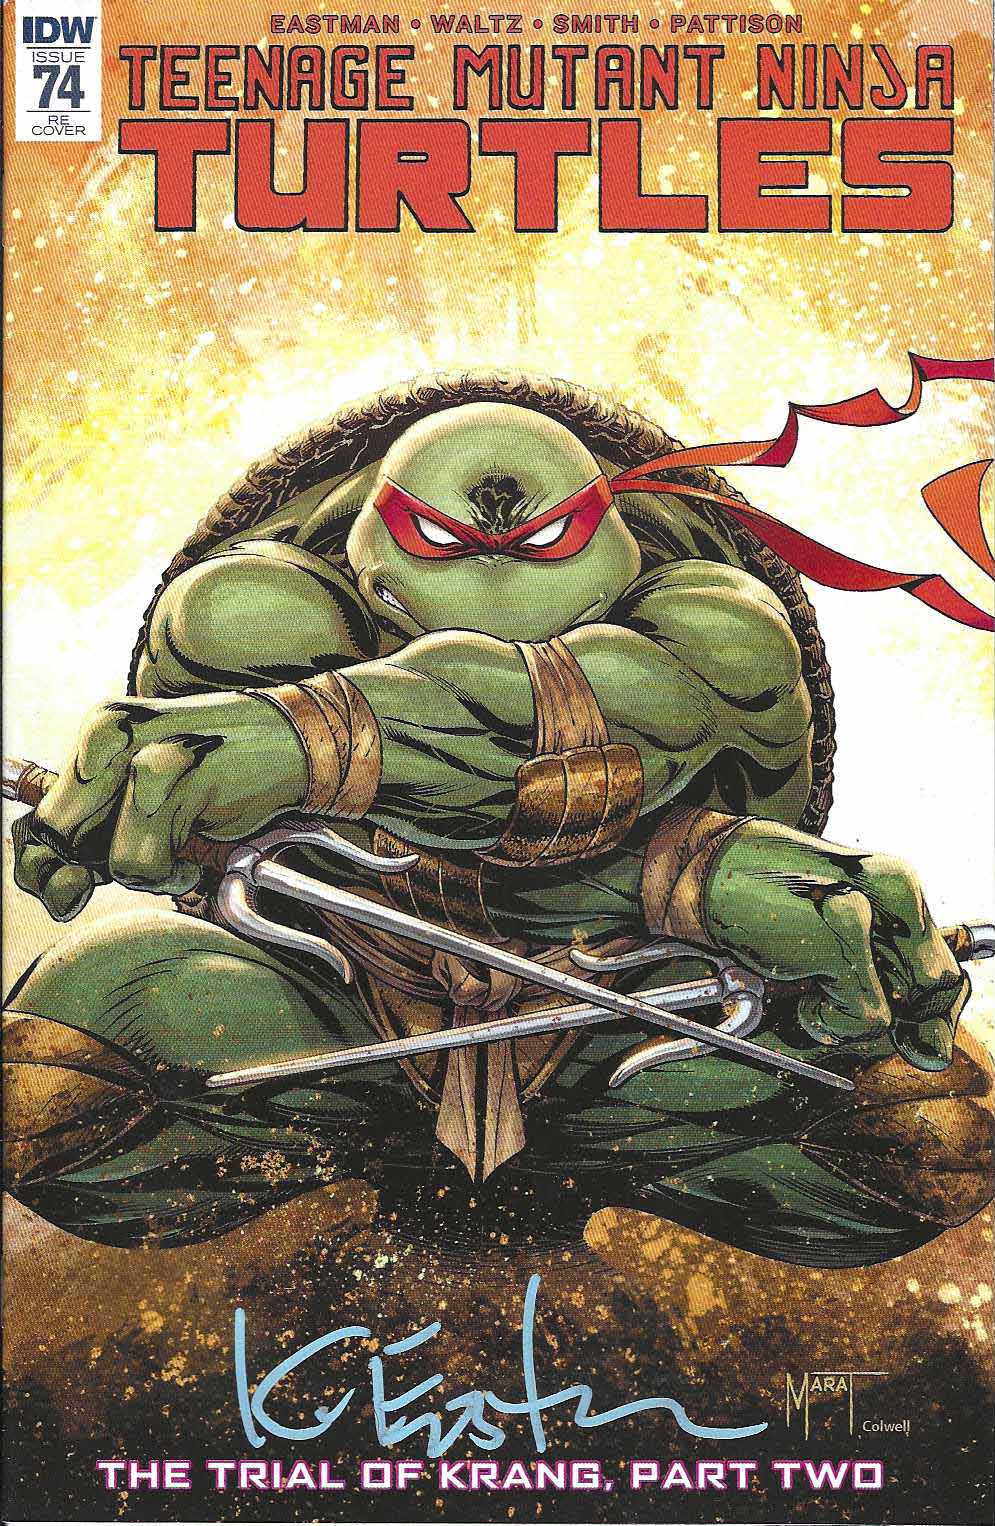 TMNT Issue 74, Planet Awesome Cover – Signed